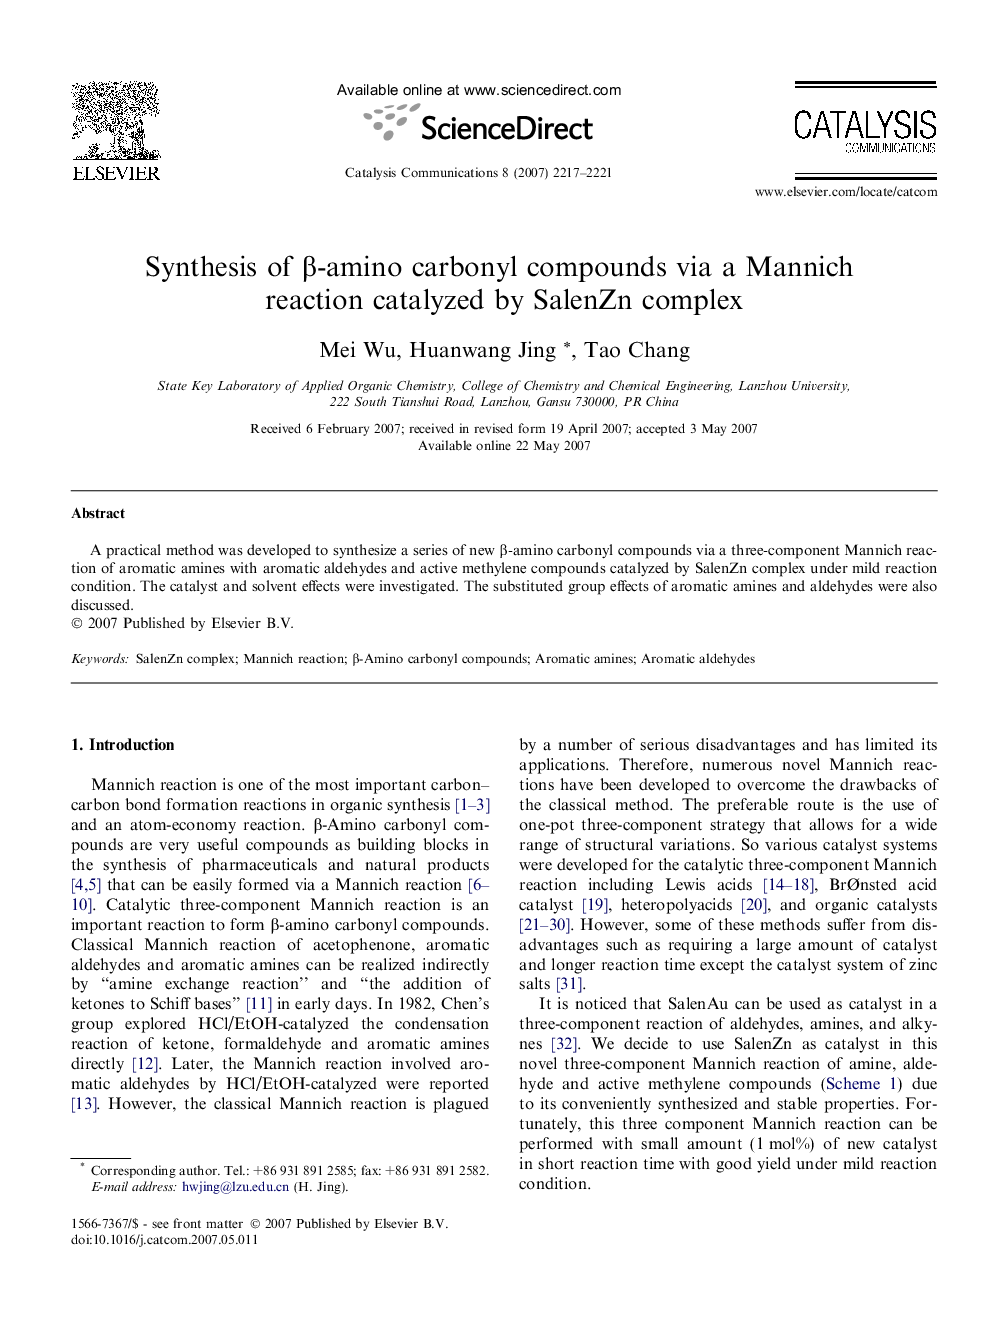 Synthesis of β-amino carbonyl compounds via a Mannich reaction catalyzed by SalenZn complex